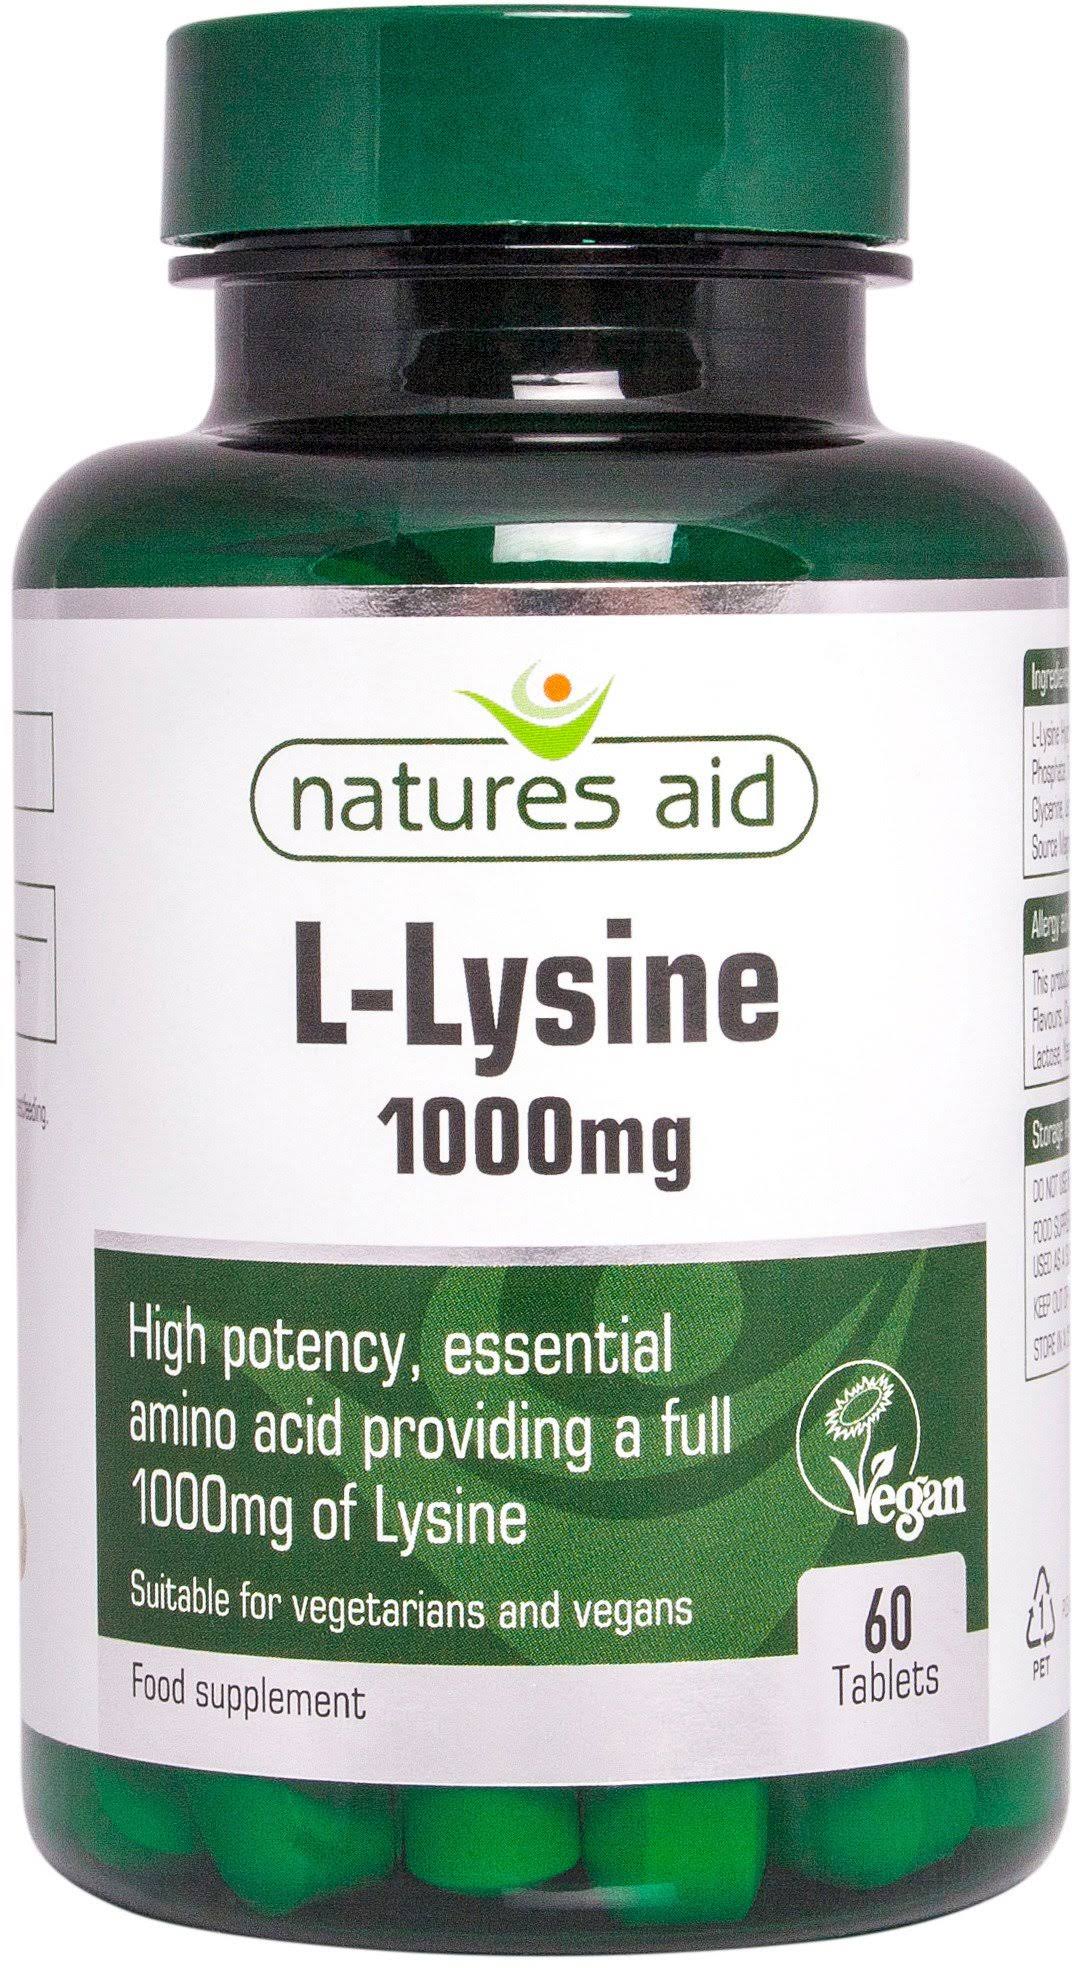 Nature's Aid L-Lysine Food Supplement - 1000mg, 60 Tablets